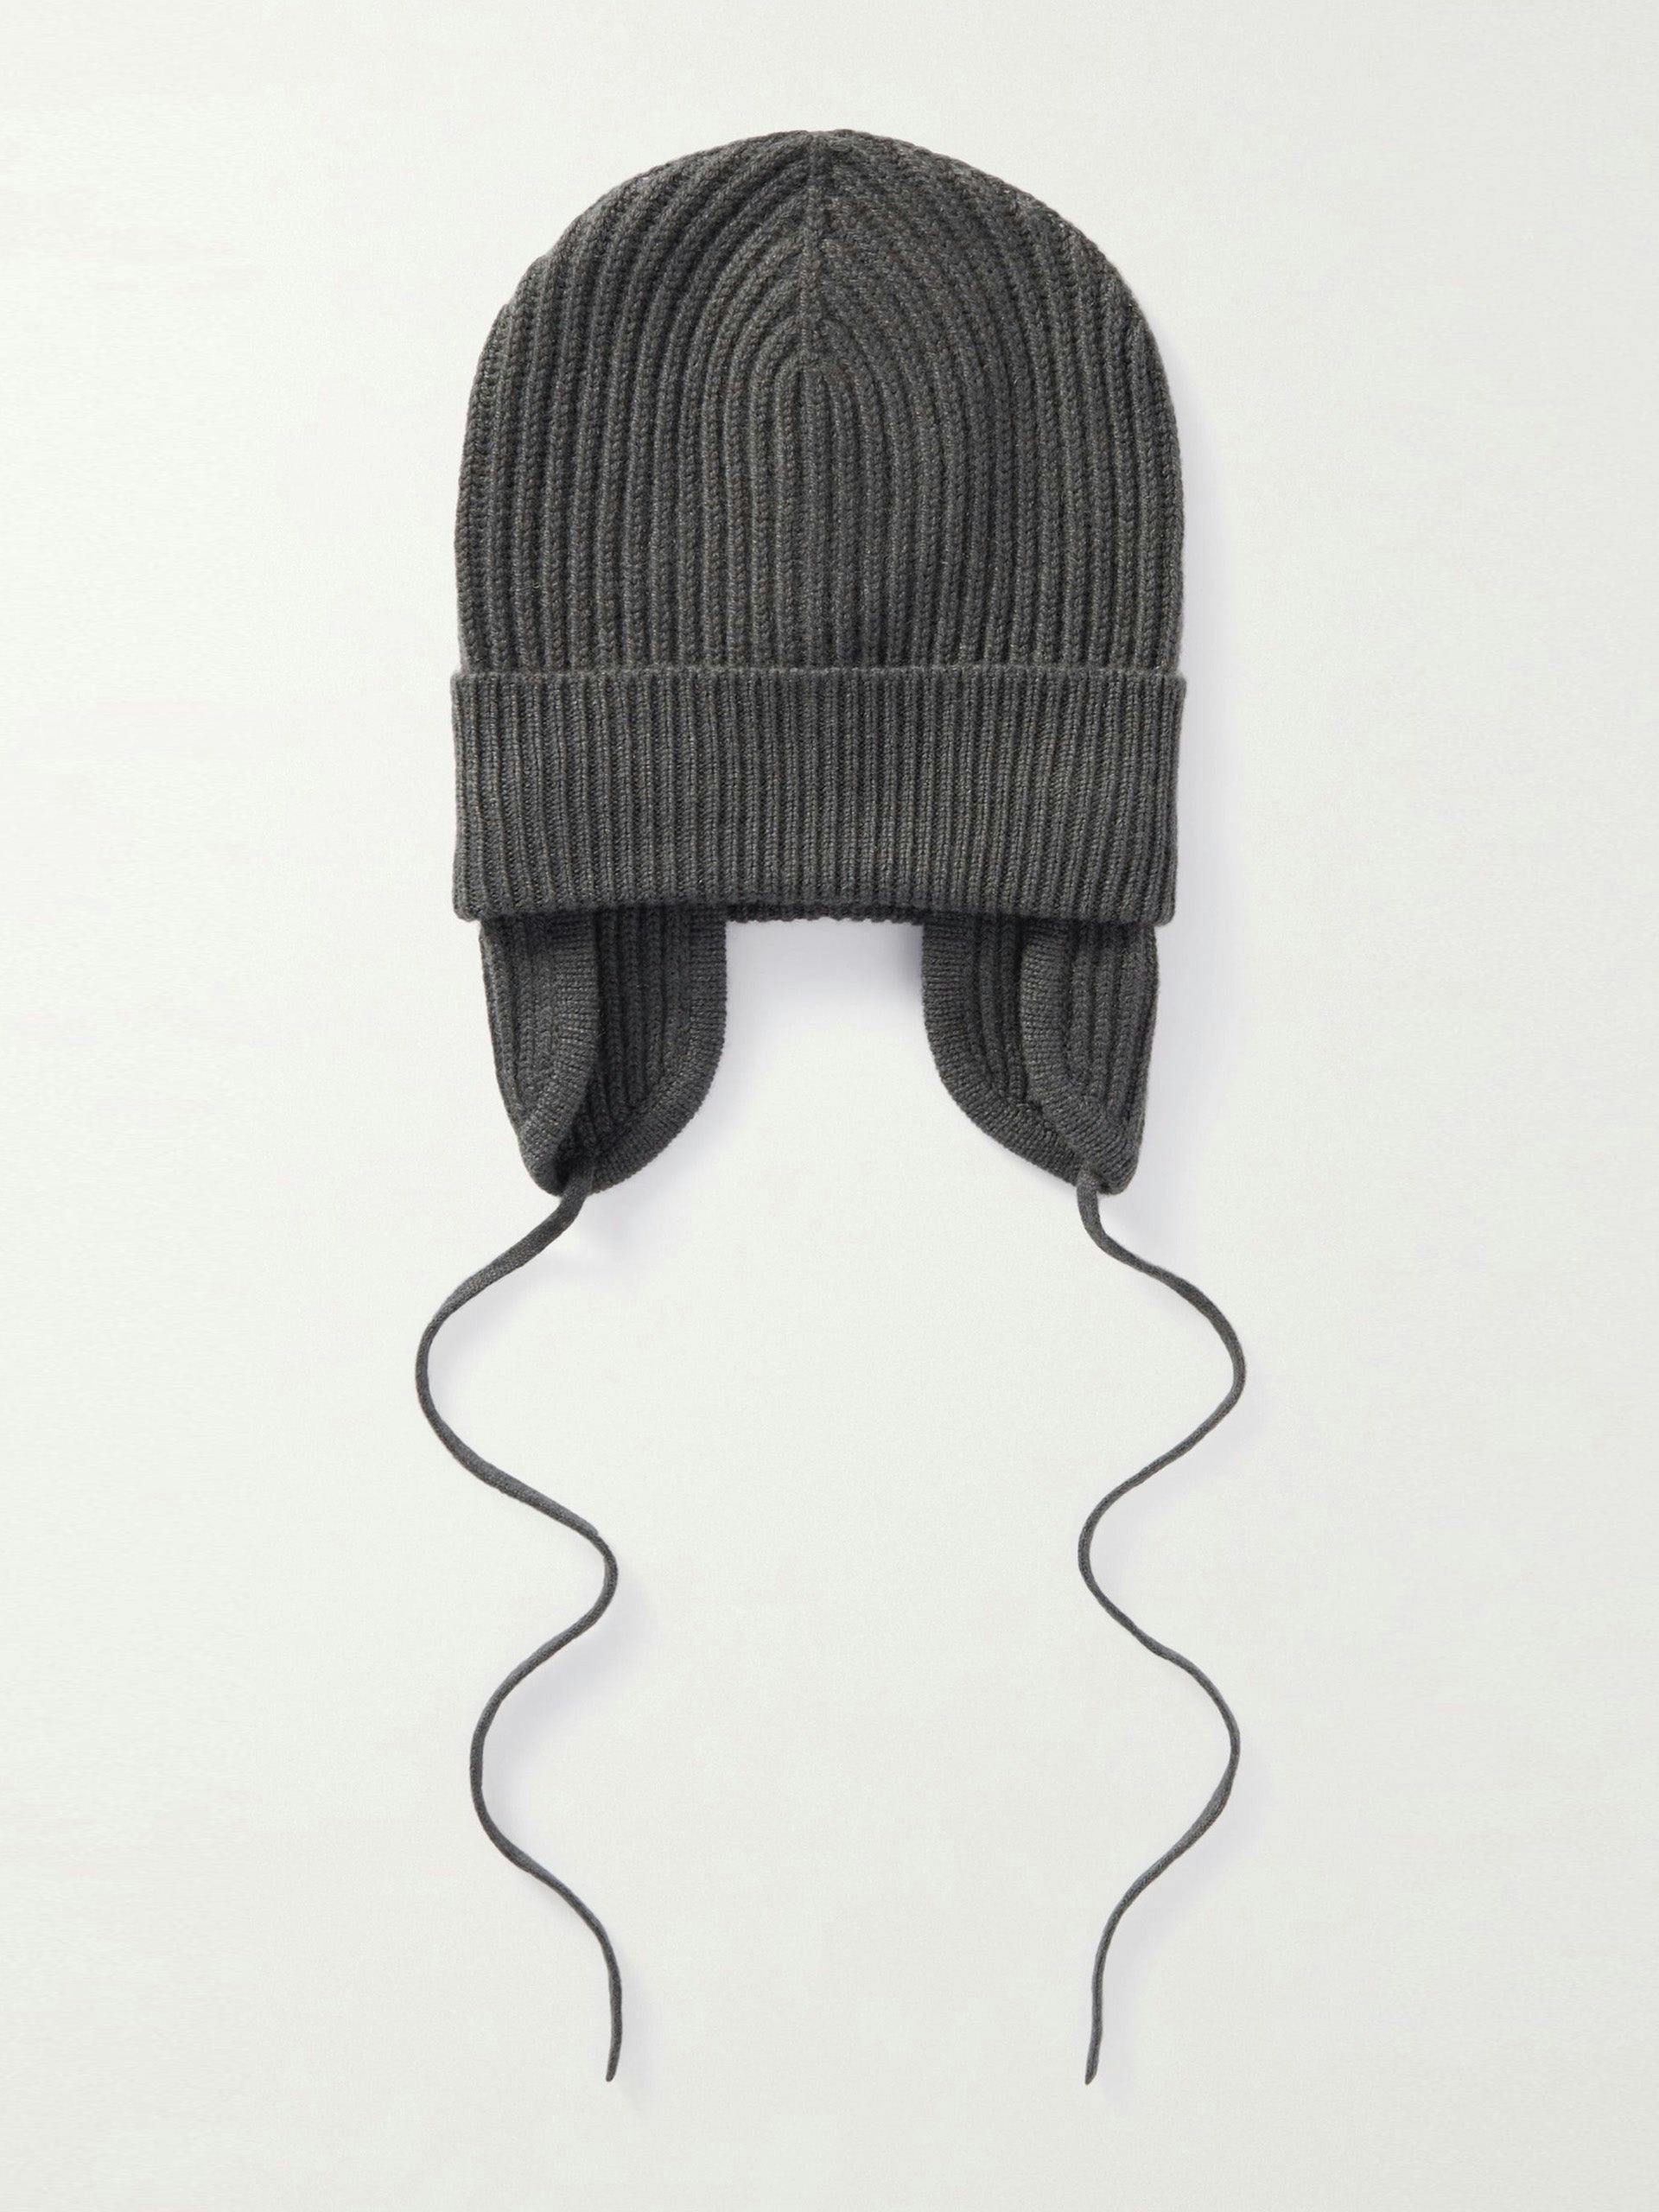 Ribbed cashmere grey hat